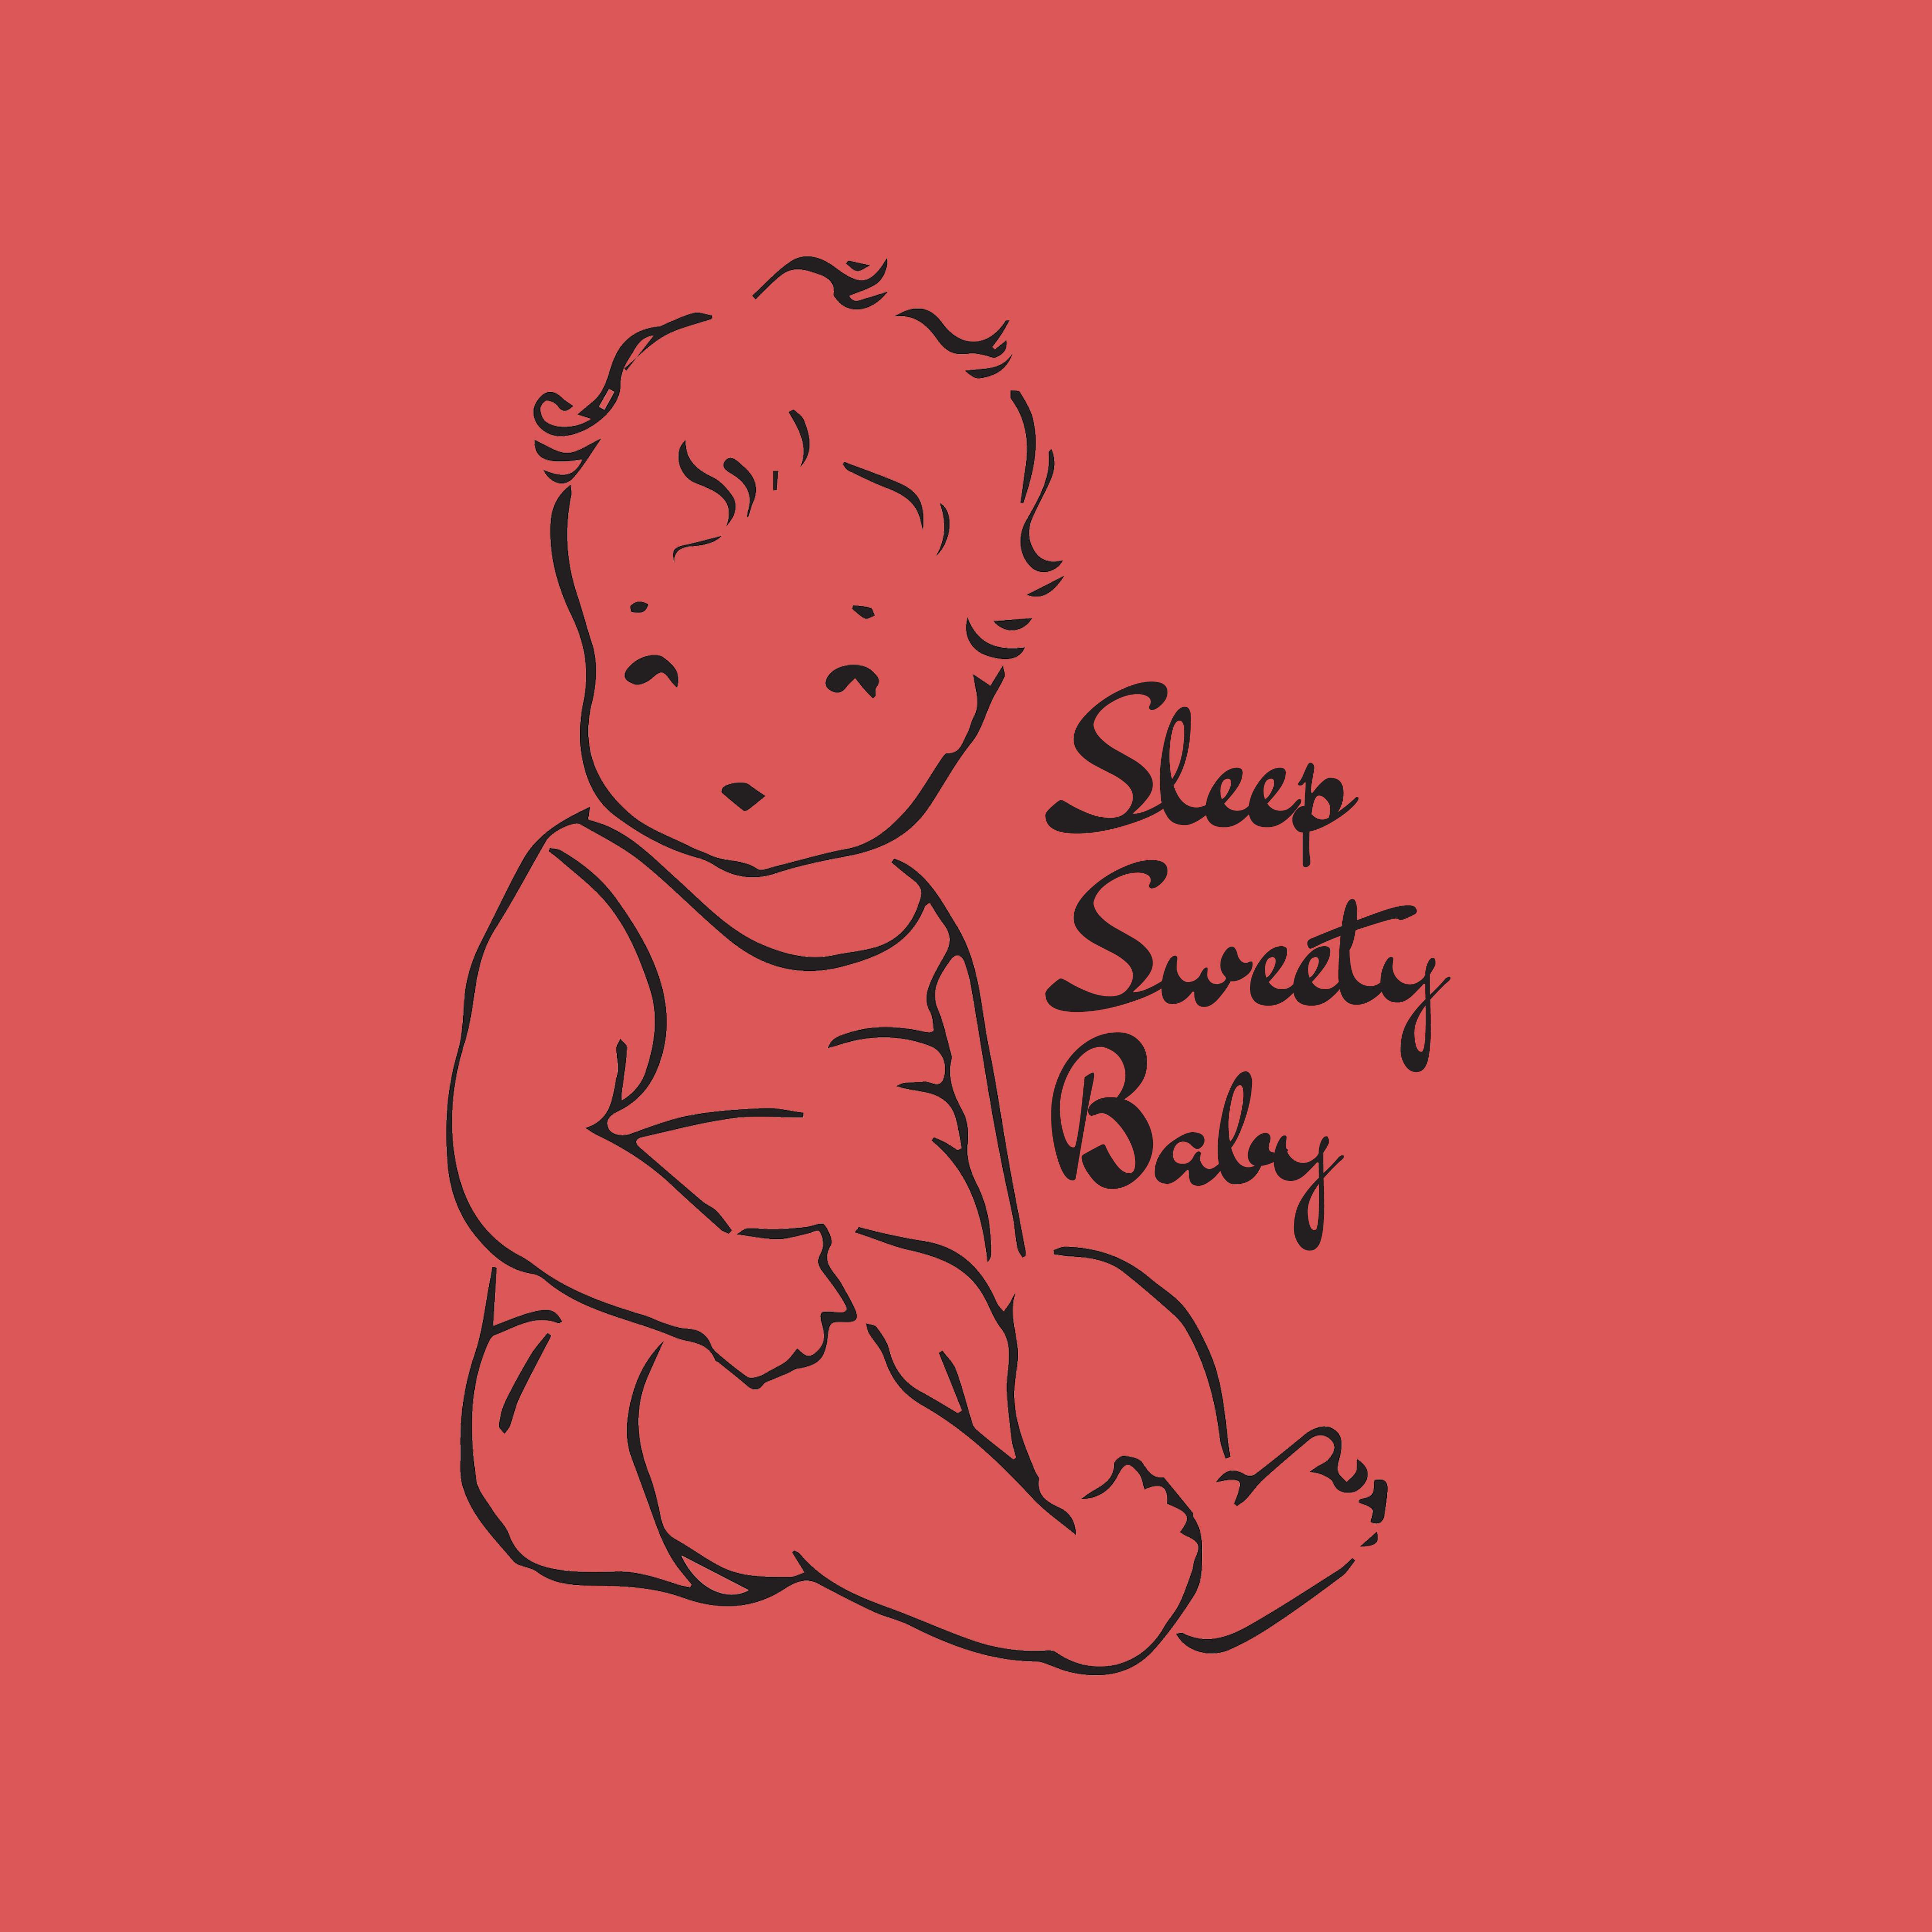 Sleep Sweetly Baby: Best Ambient Music to Sleep for Your Baby